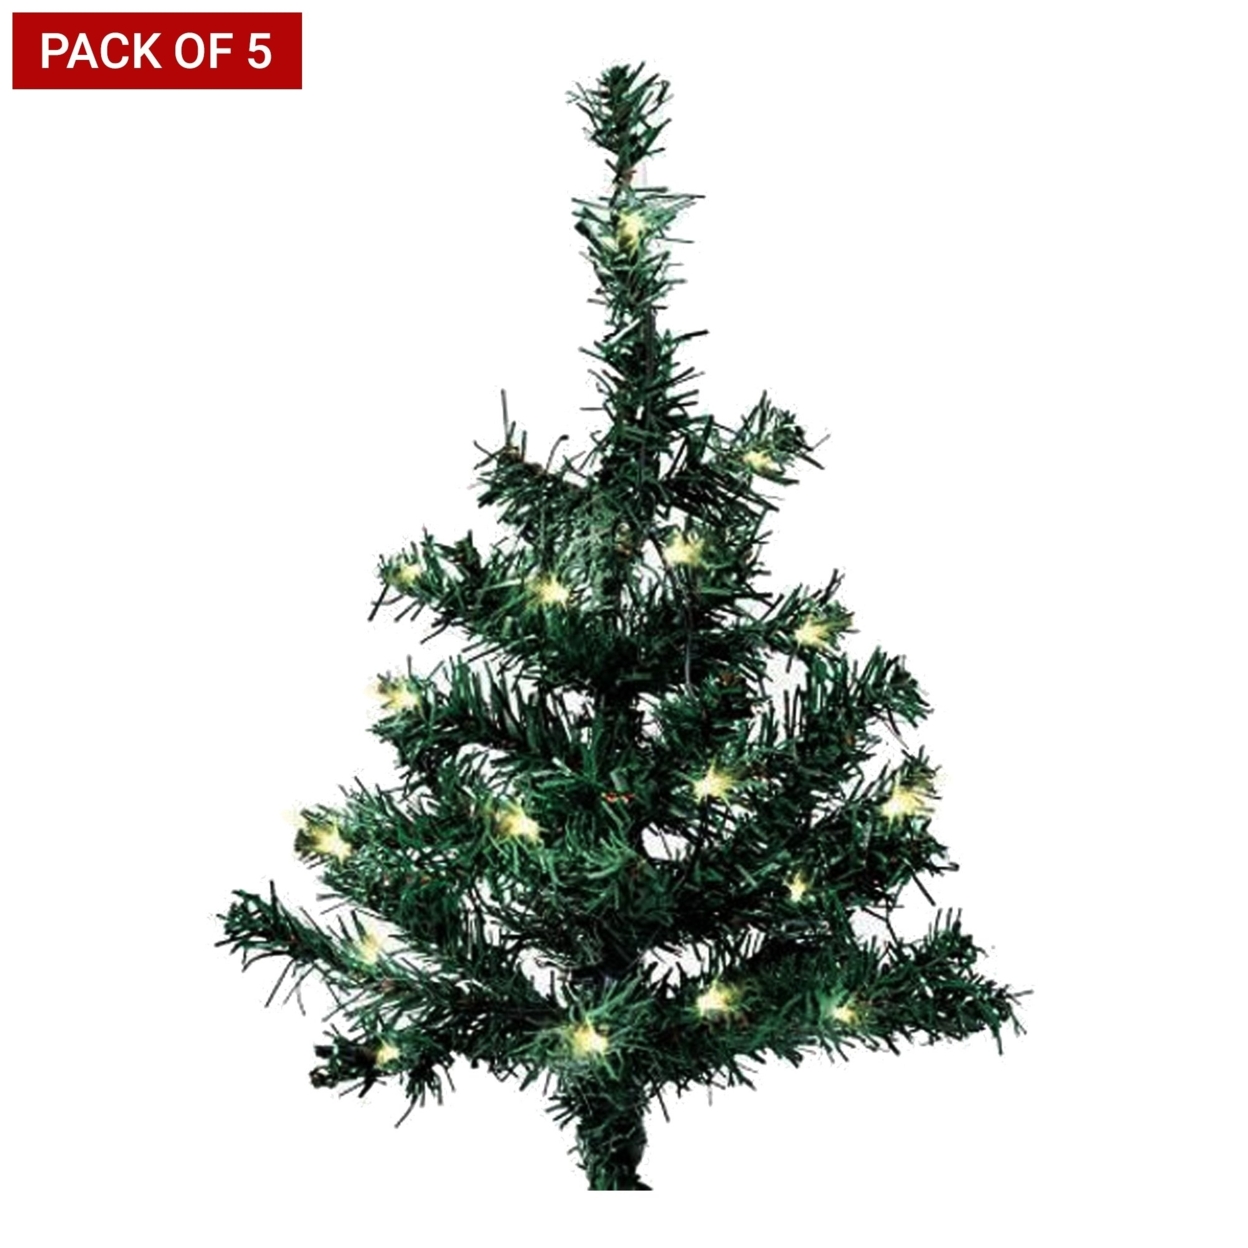 Ideaworks Outdoor Solar Christmas Tree - Pack of 5